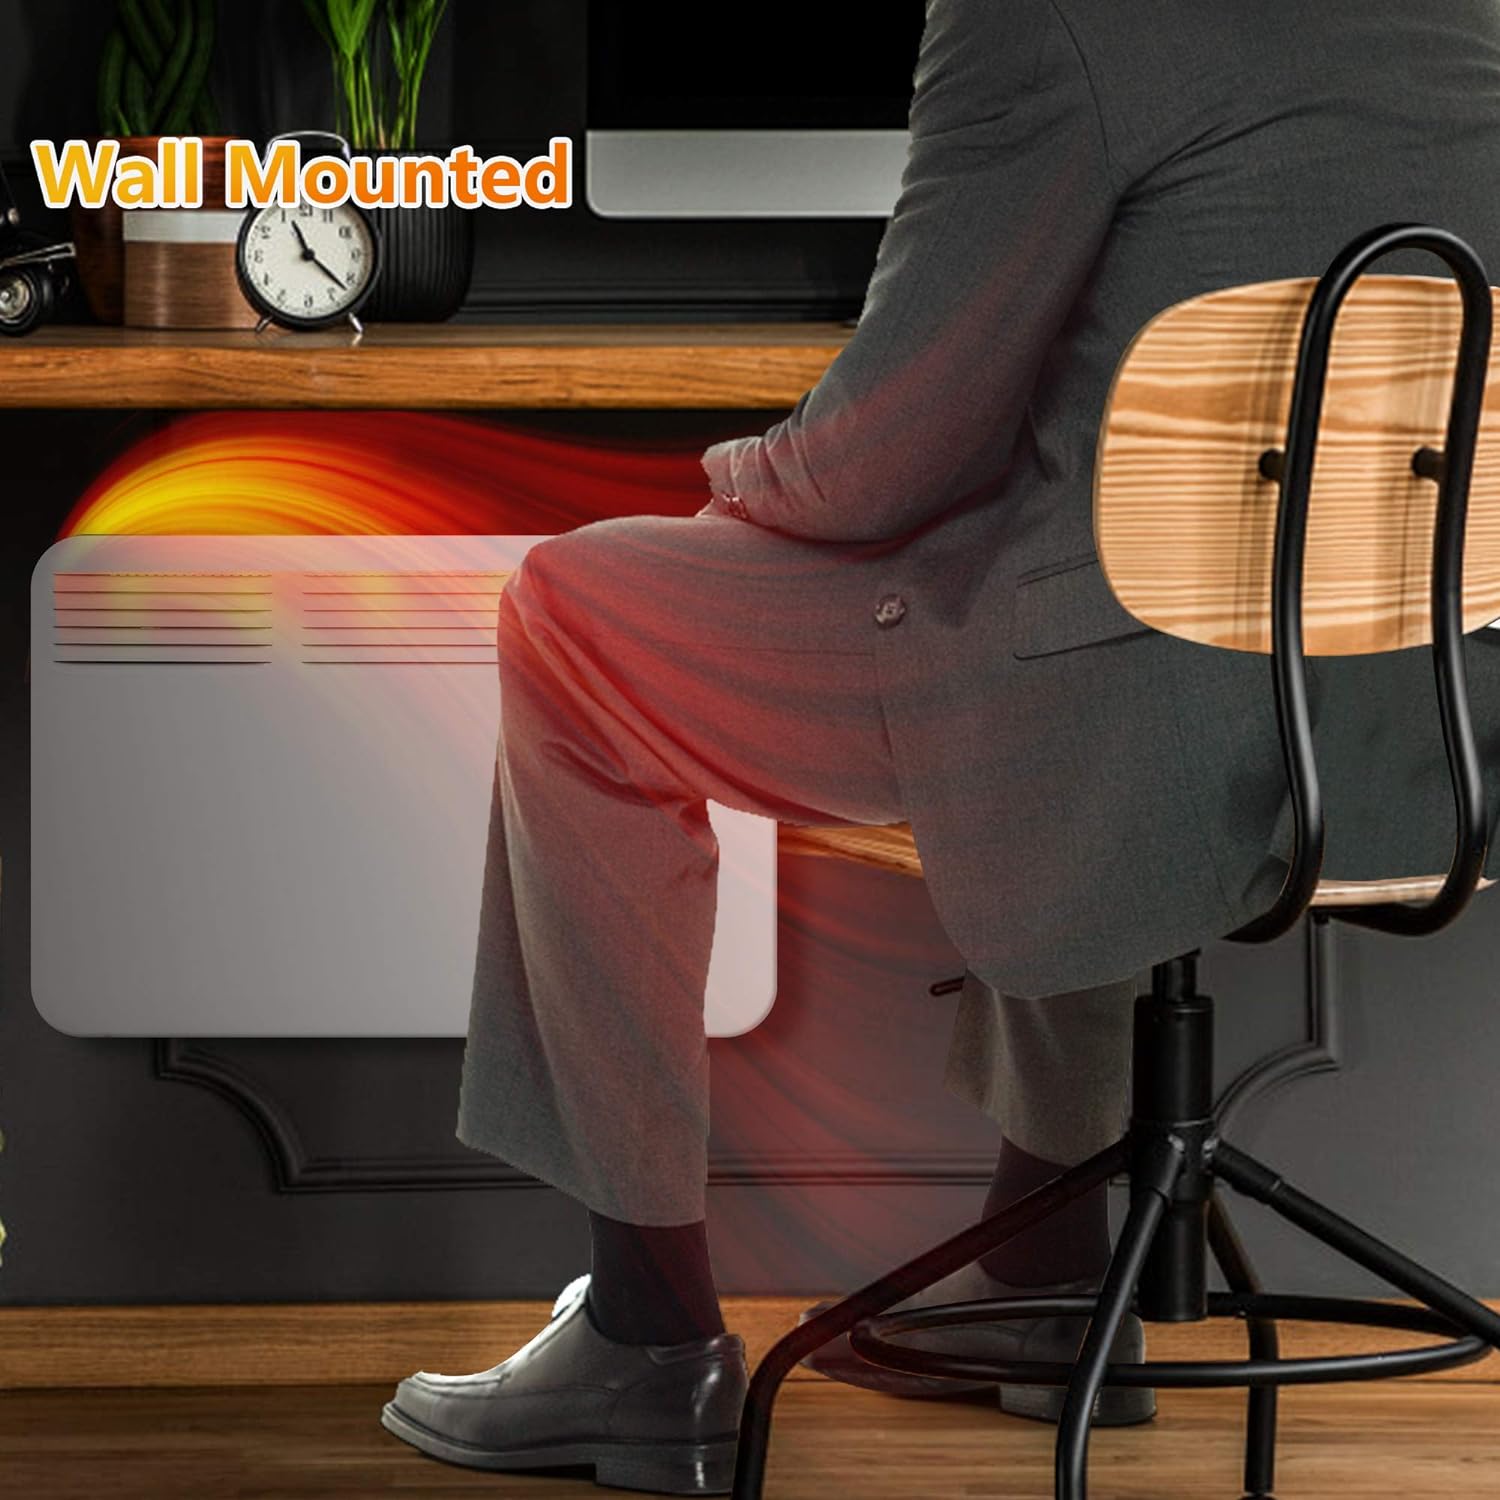 E-Macht 1000W Electric Convector Heater with Wheels Freestanding/Wall Mounted Smart Space Heater Panel